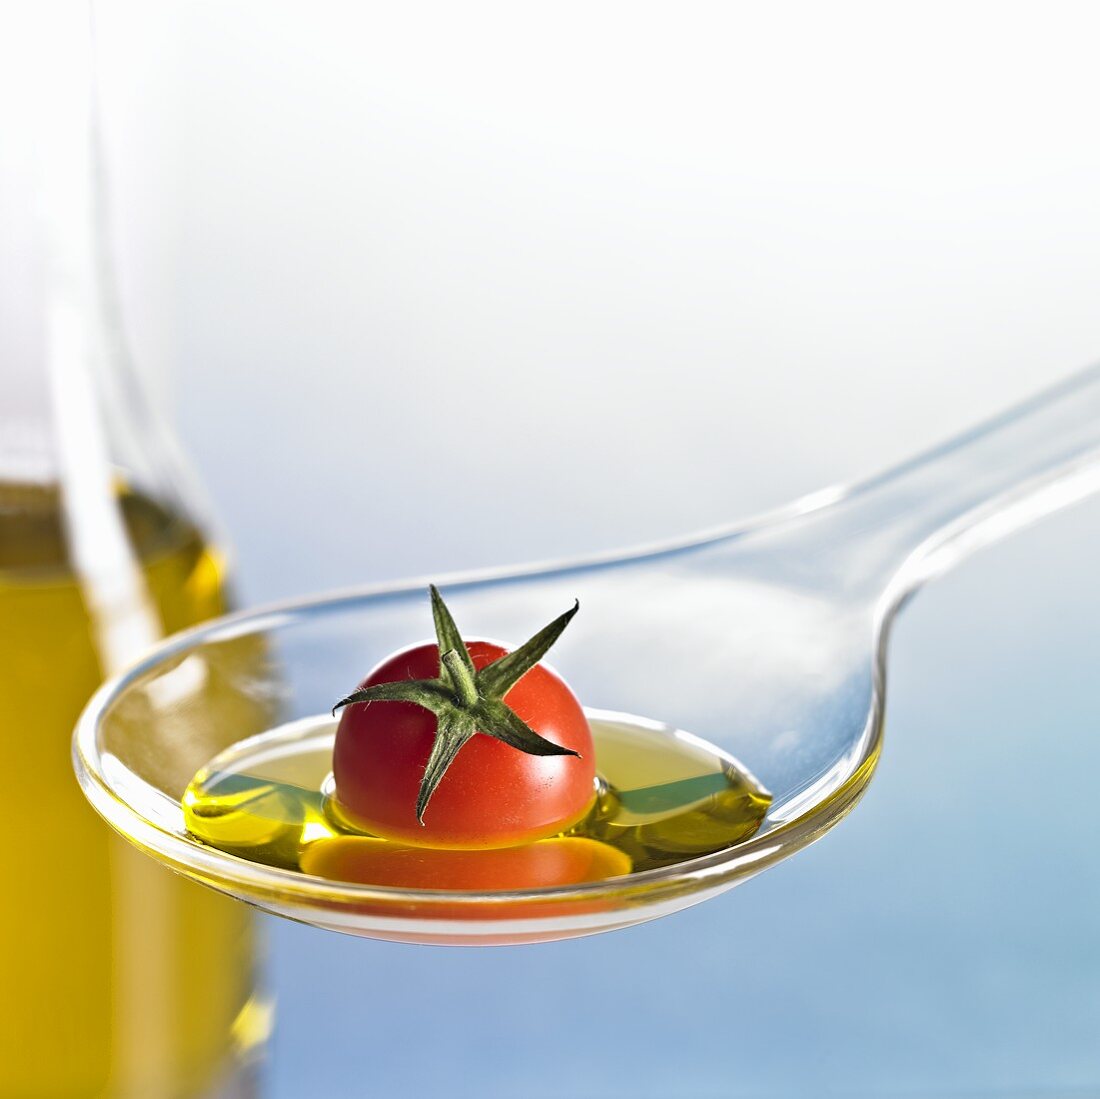 Cocktail tomato with oil on spoon